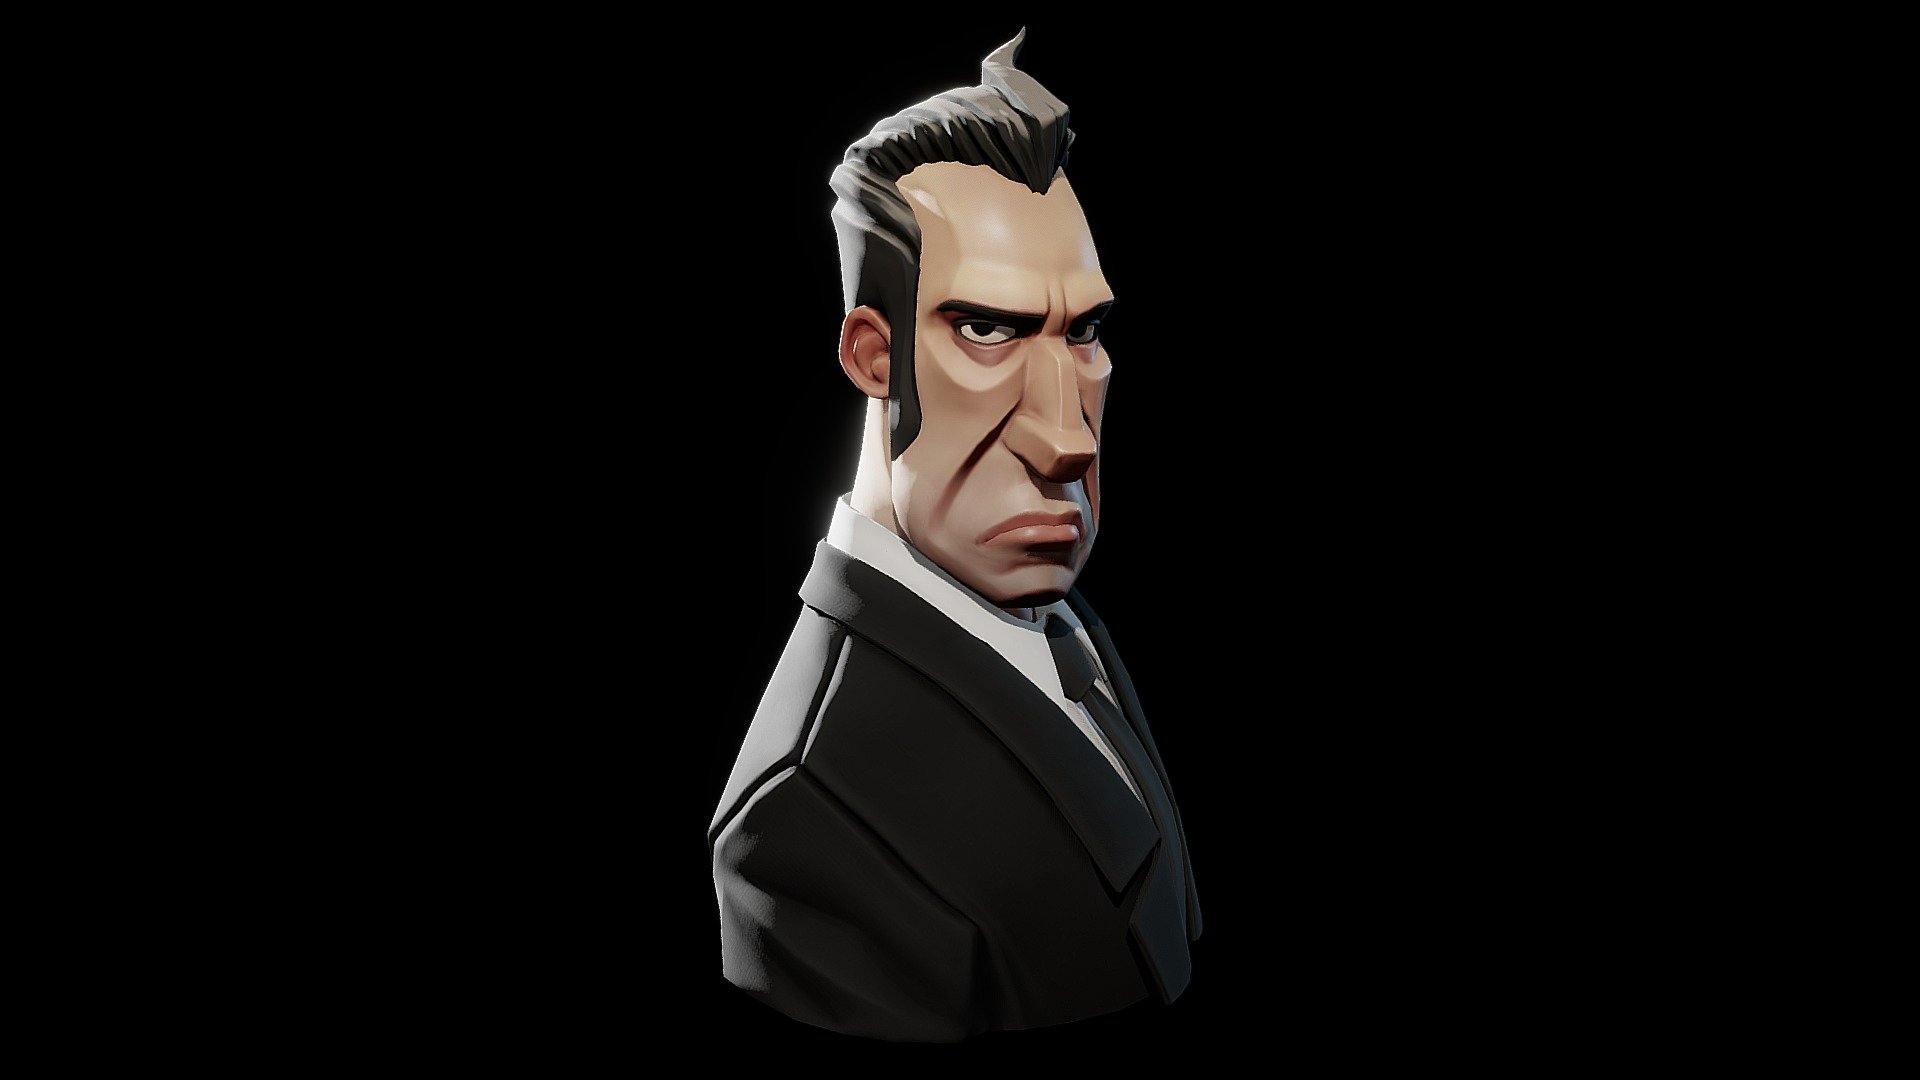 Training my cartoon skin textures and modeling skills with this really nice character based on a very cool concept by Florian Dreyer (https://www.artstation.com/artwork/n5x86) 😄

The ArtStation Post with nice Marmoset Renders : https://www.artstation.com/artwork/klaGx6 - Corporate Dude (concept by Florian Dreyer) - 3D model by MrGratin 3d model